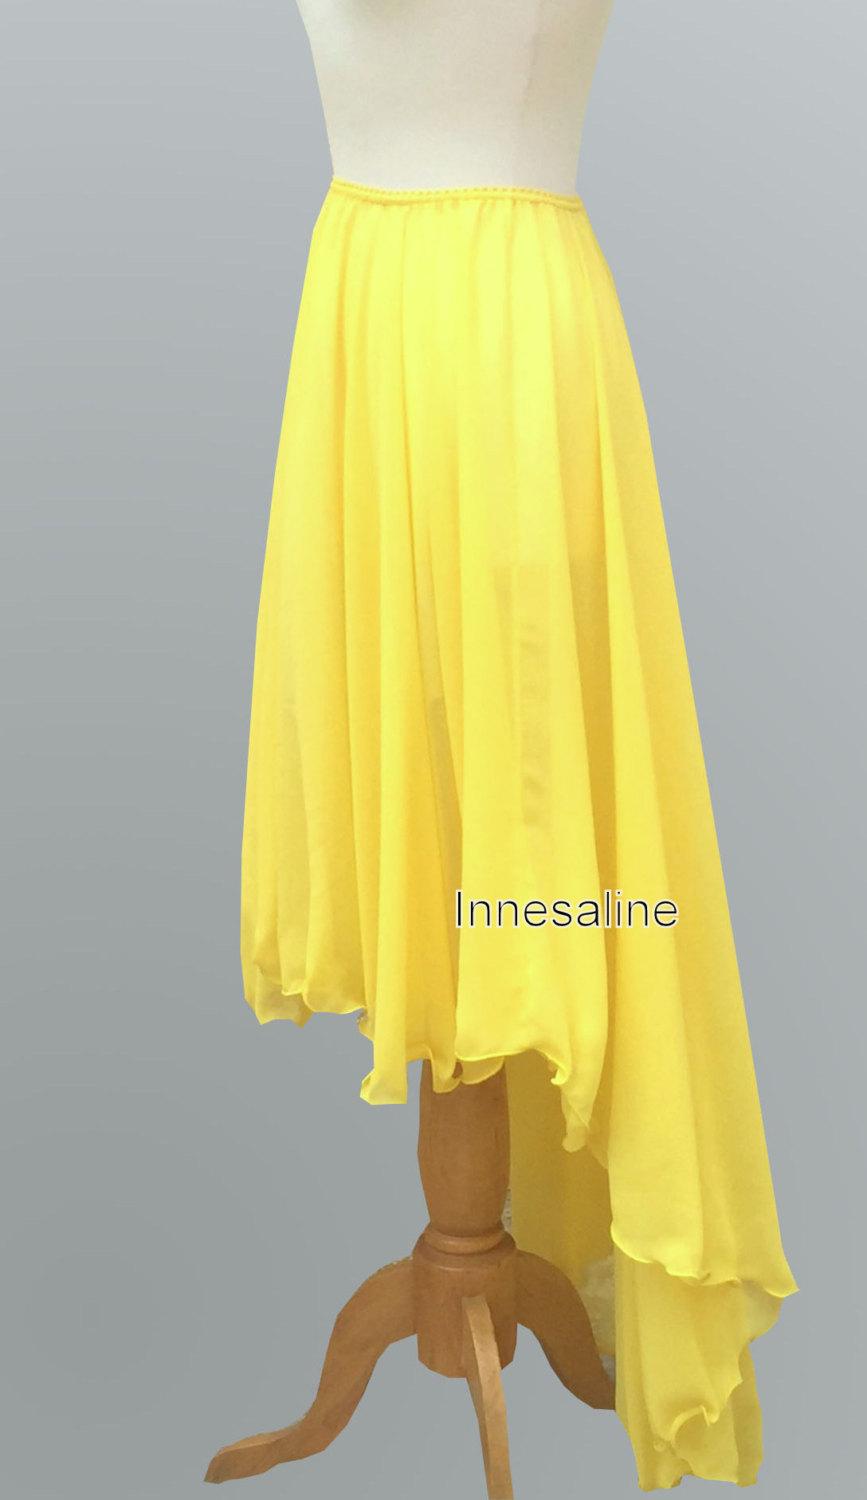 Wedding - Assymetric chiffon hight low skirt  in bright yellow  color